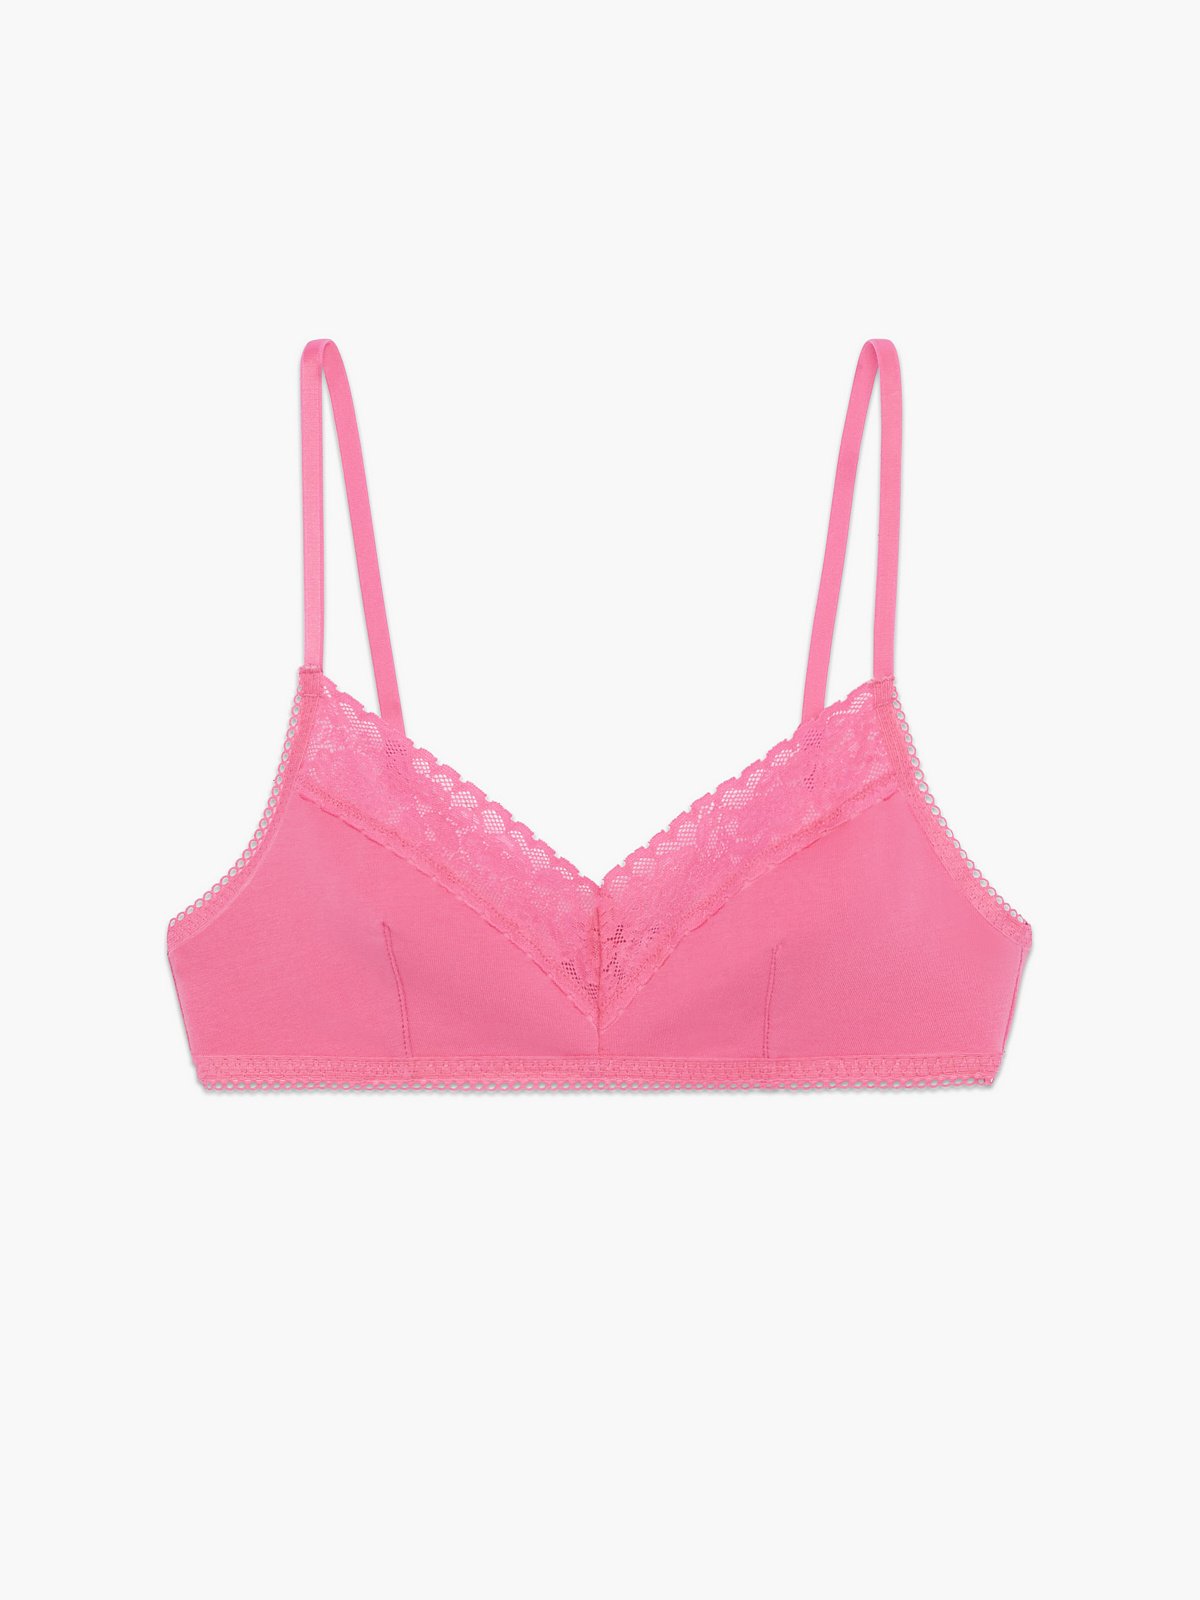 YGVBJHX bras for women， Luvlette Padded Racerback Bralette (Color : Dusty  Pink, Size : XS) : Buy Online at Best Price in KSA - Souq is now :  Fashion